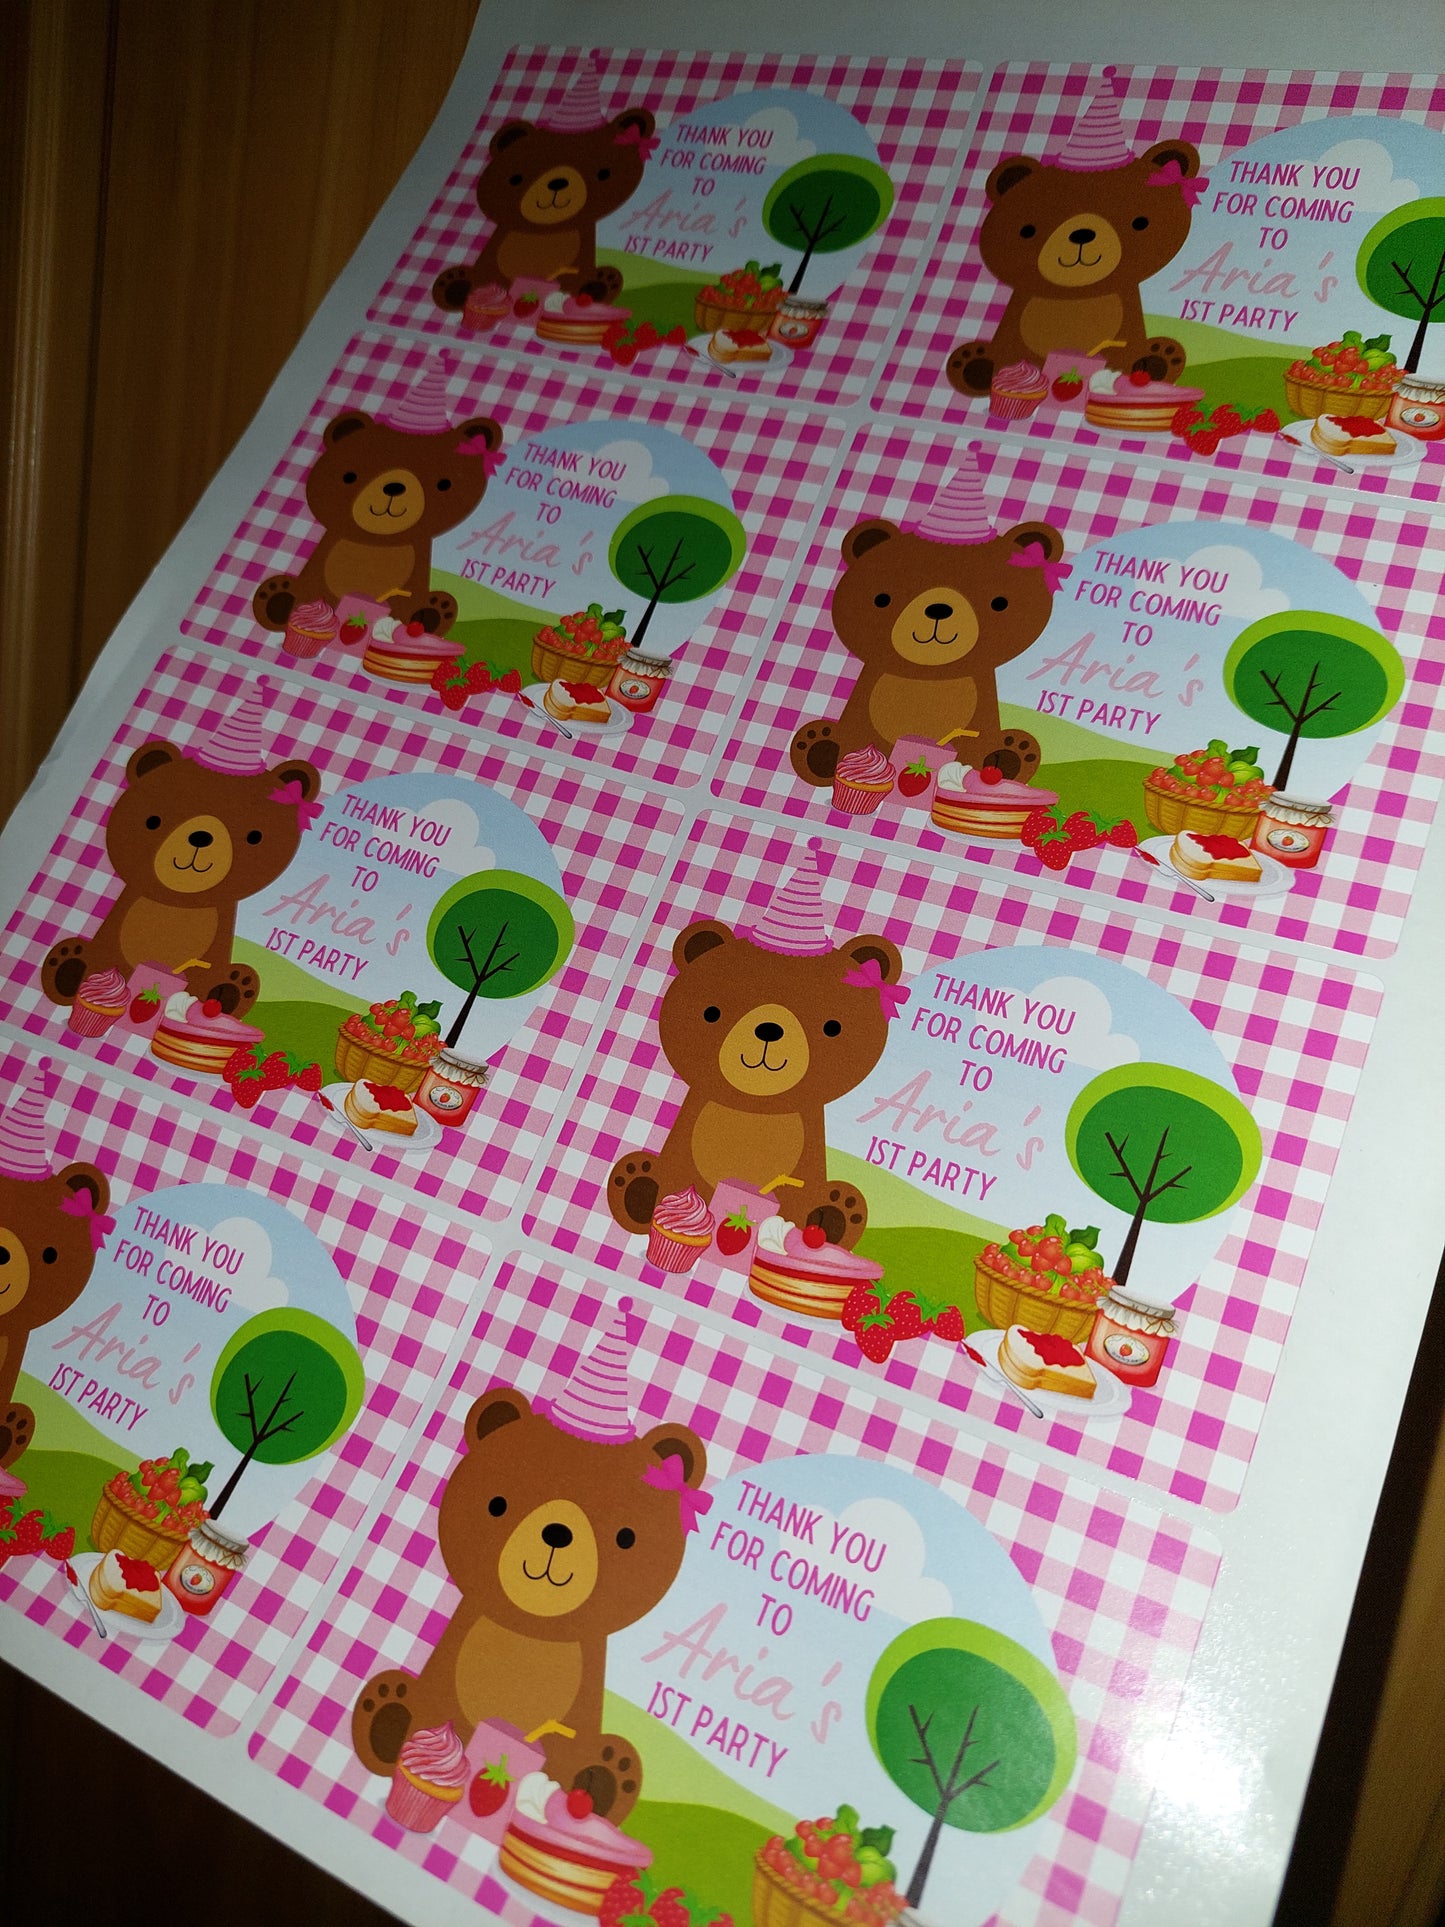 Rectangle Stickers | Party Stickers | Pink Teddy Bear Picnic Party Stickers | Party Bag Stickers